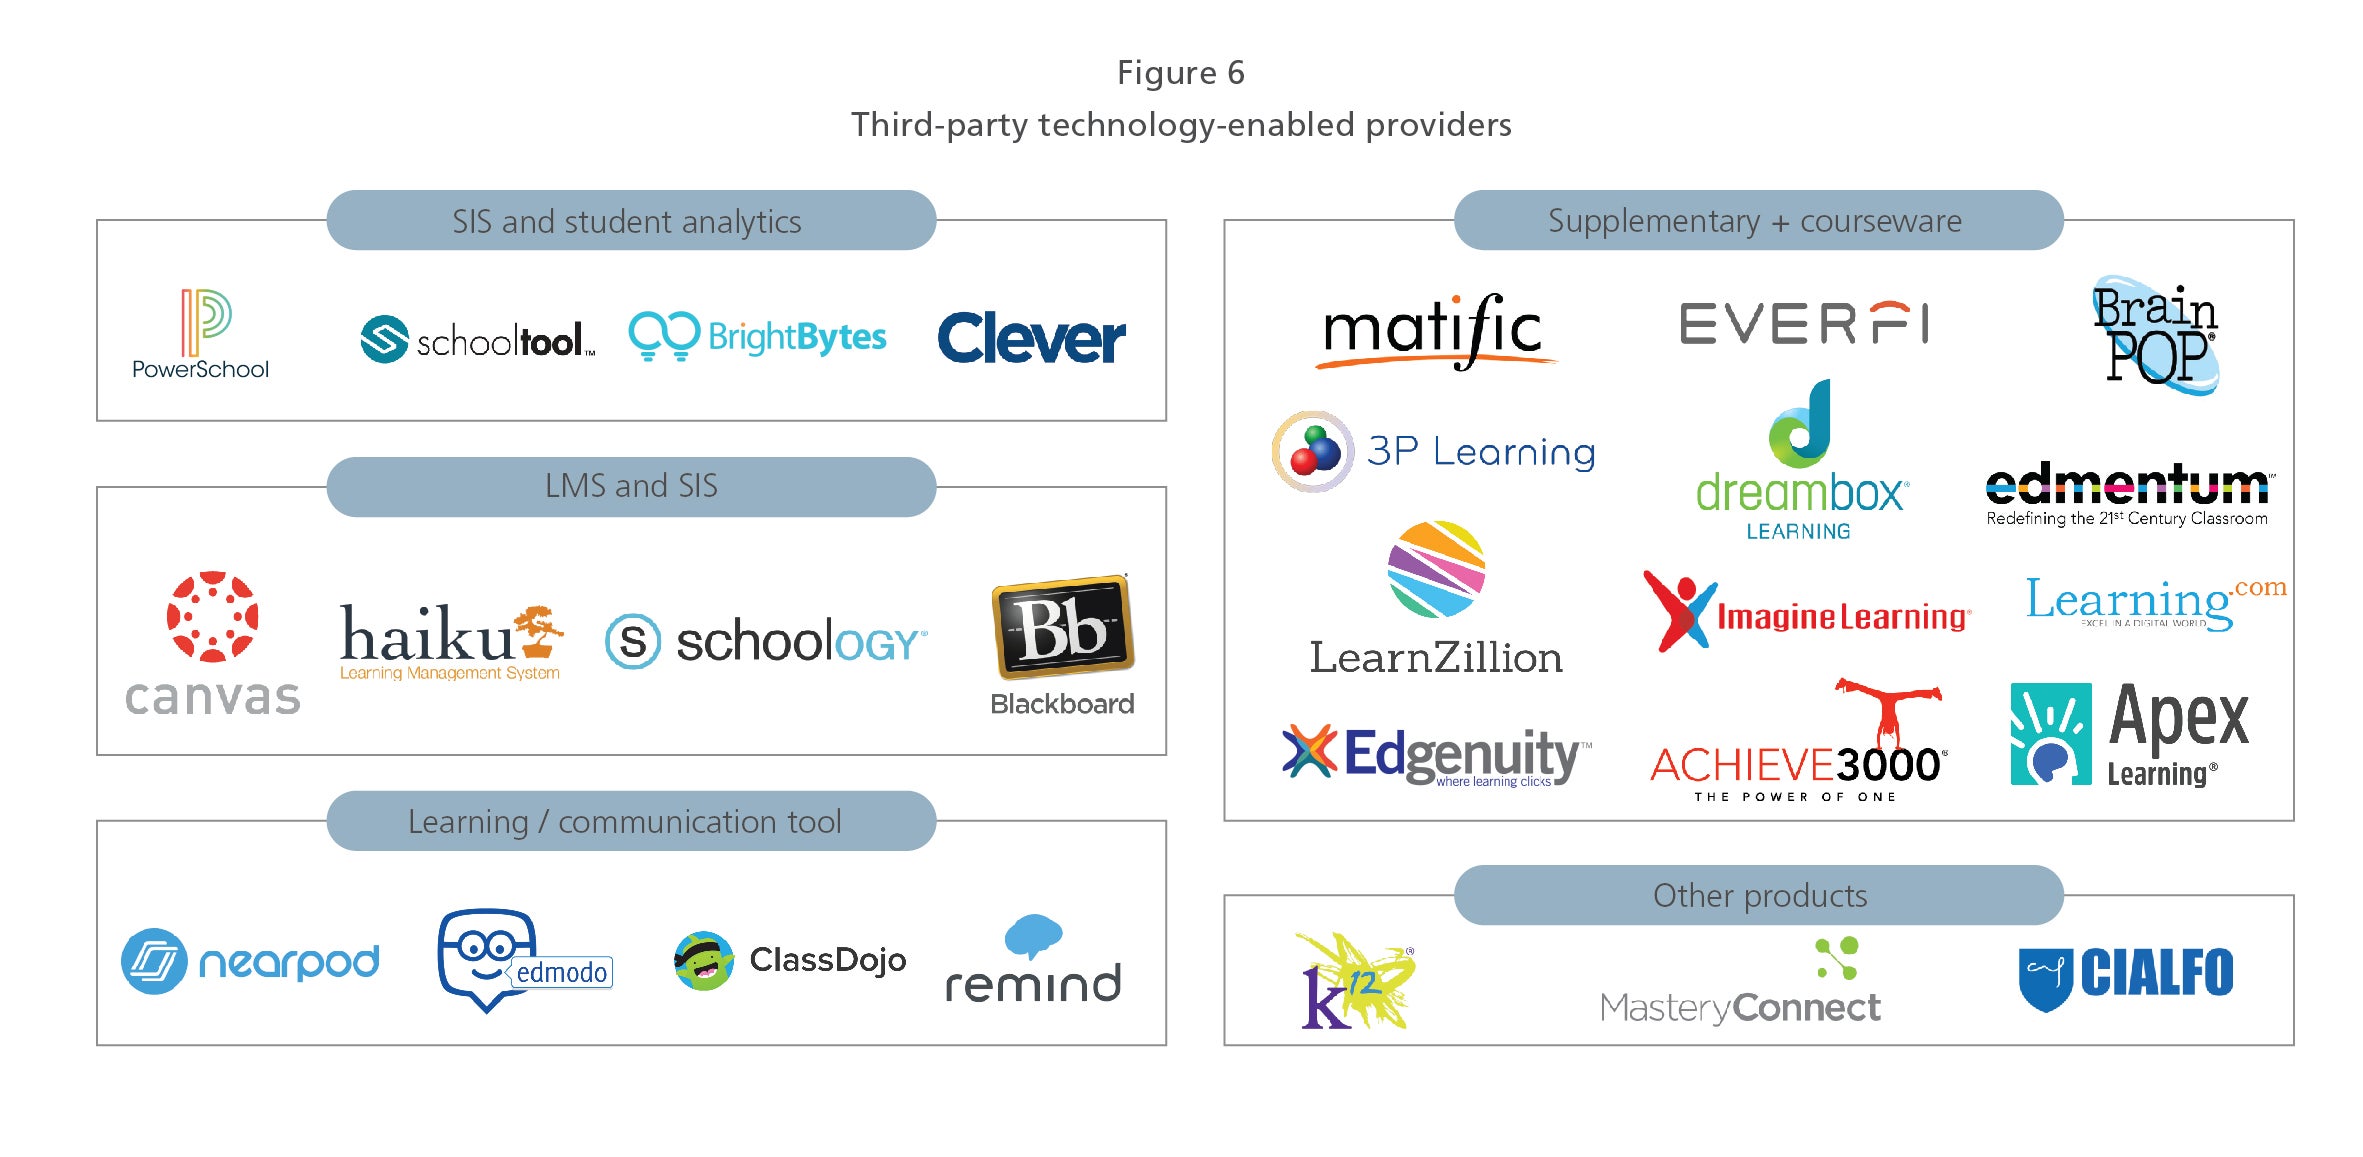 Third-party technology-enabled providers